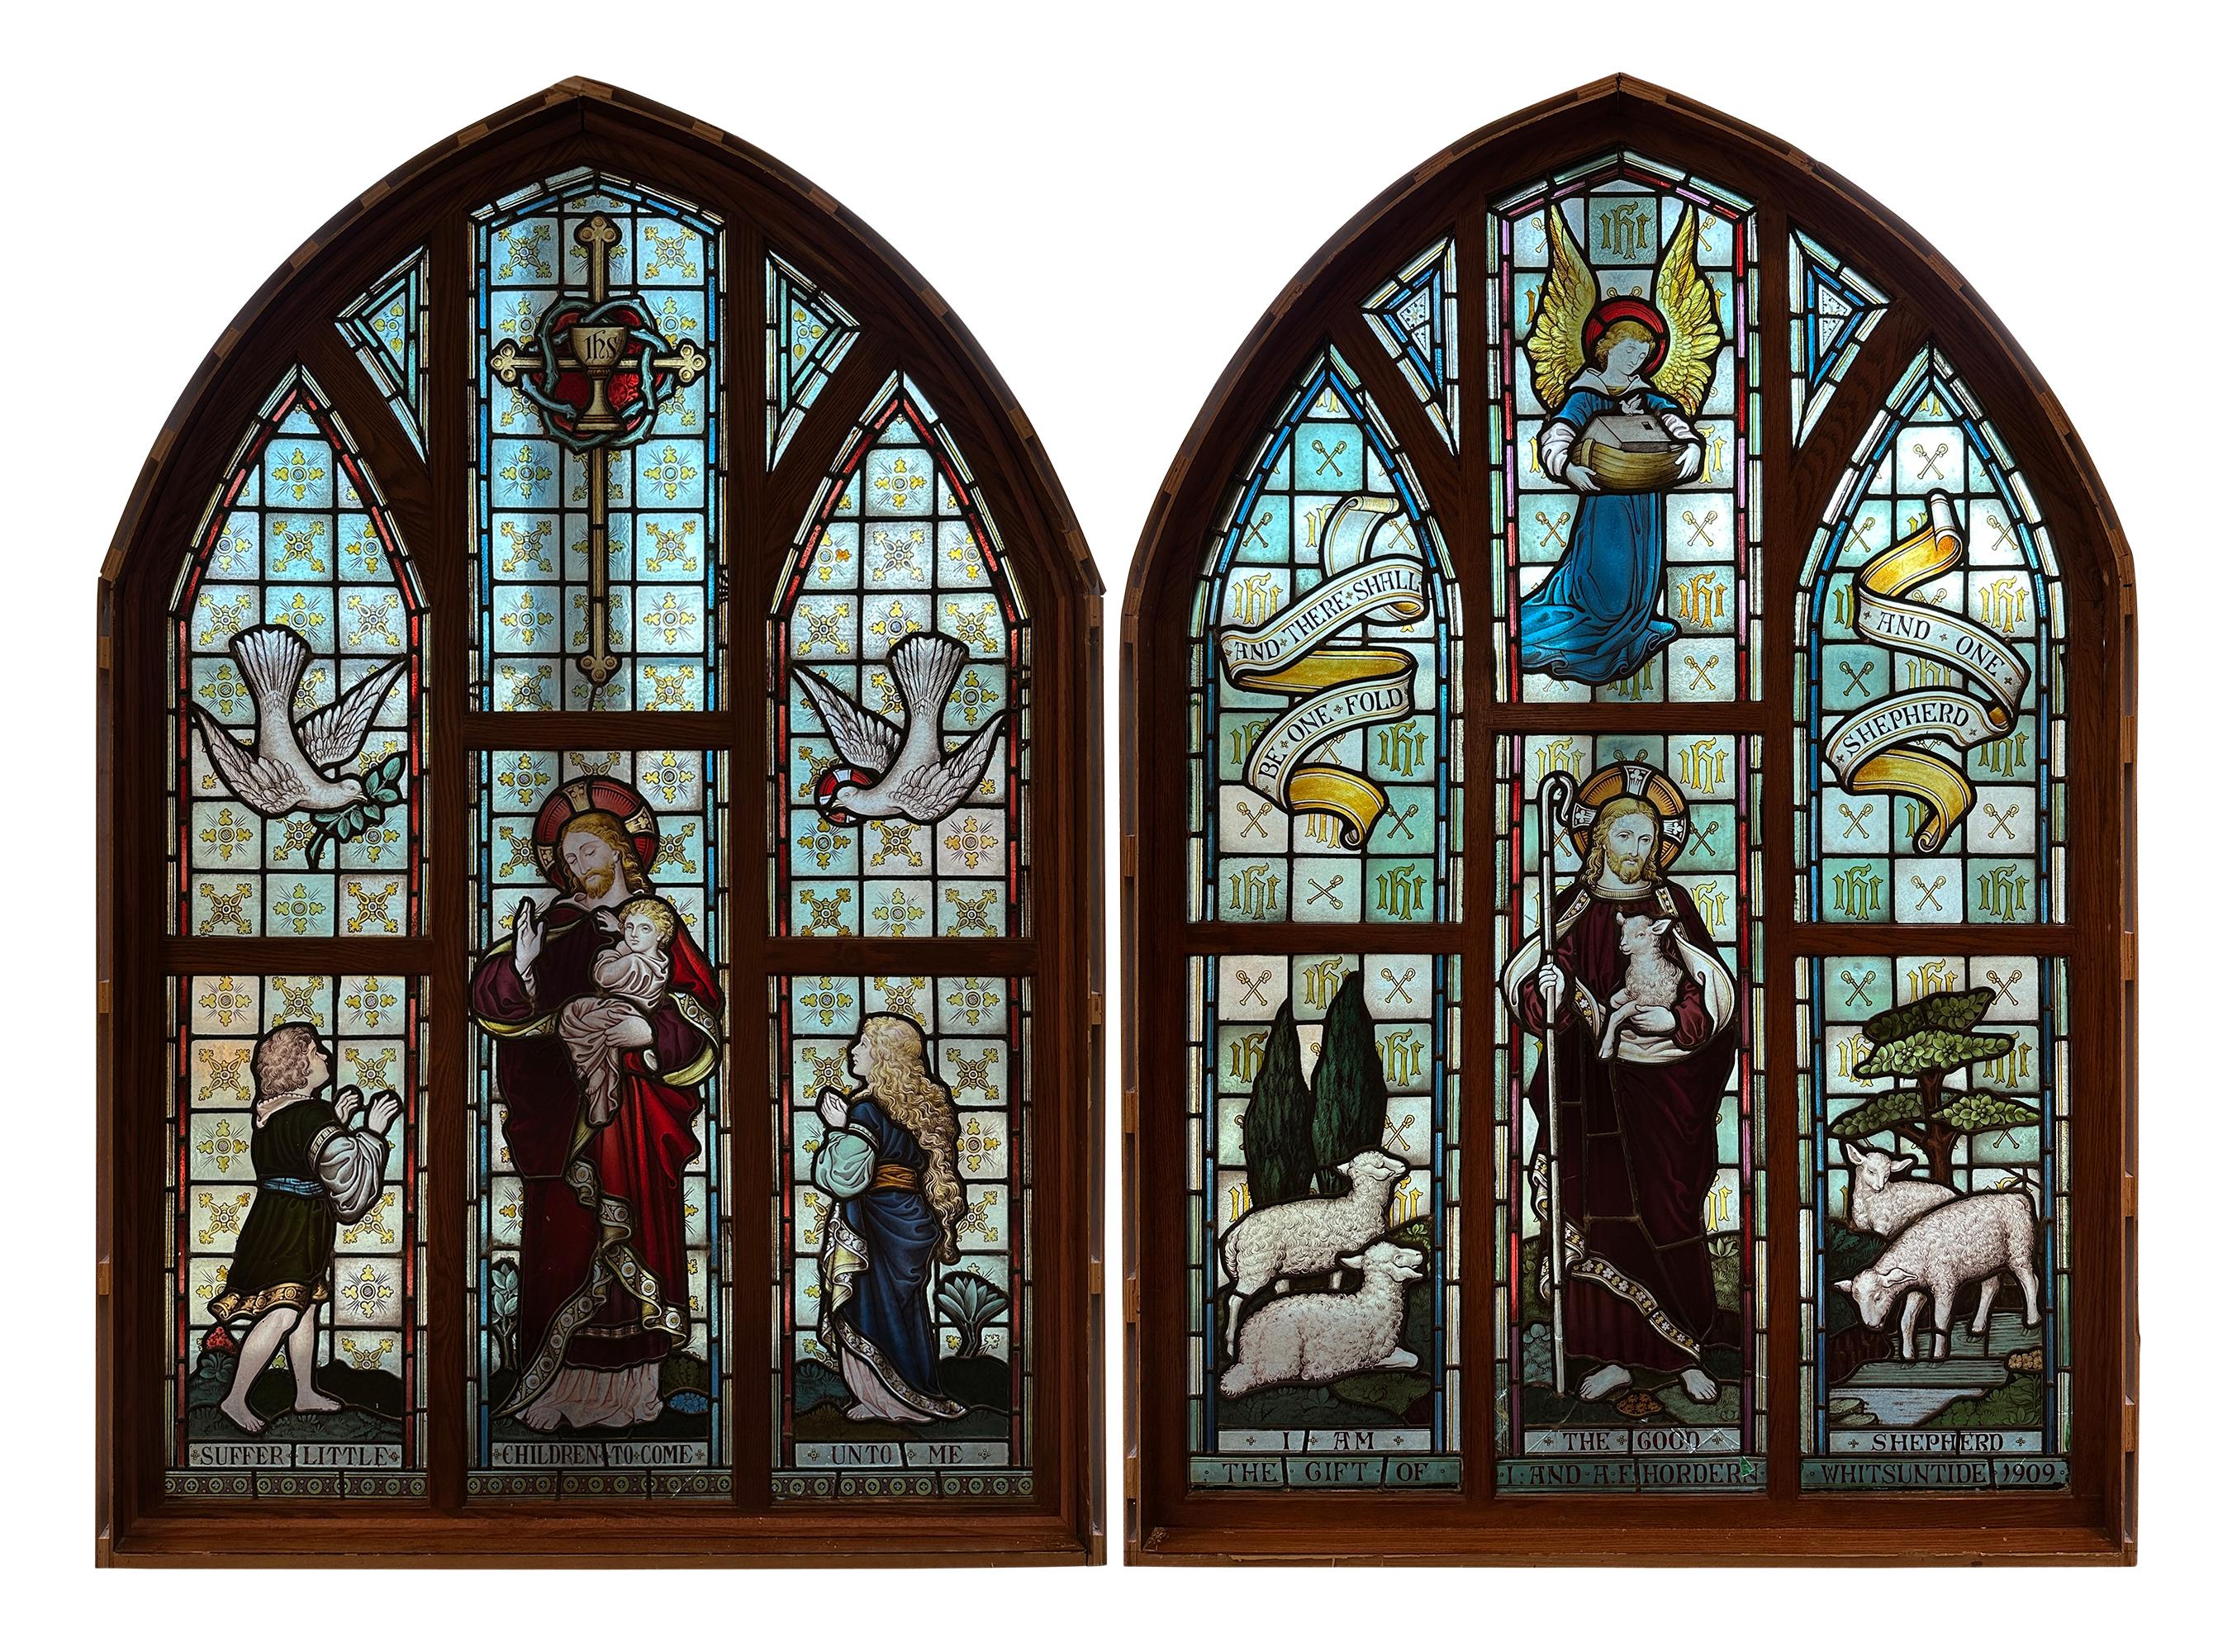 Fabulous quality turn of the 19th century pair of religious painted stained glass arched windows. Set in oak and bent wood frame.
Beautifully depicting the teachings of Jesus.
